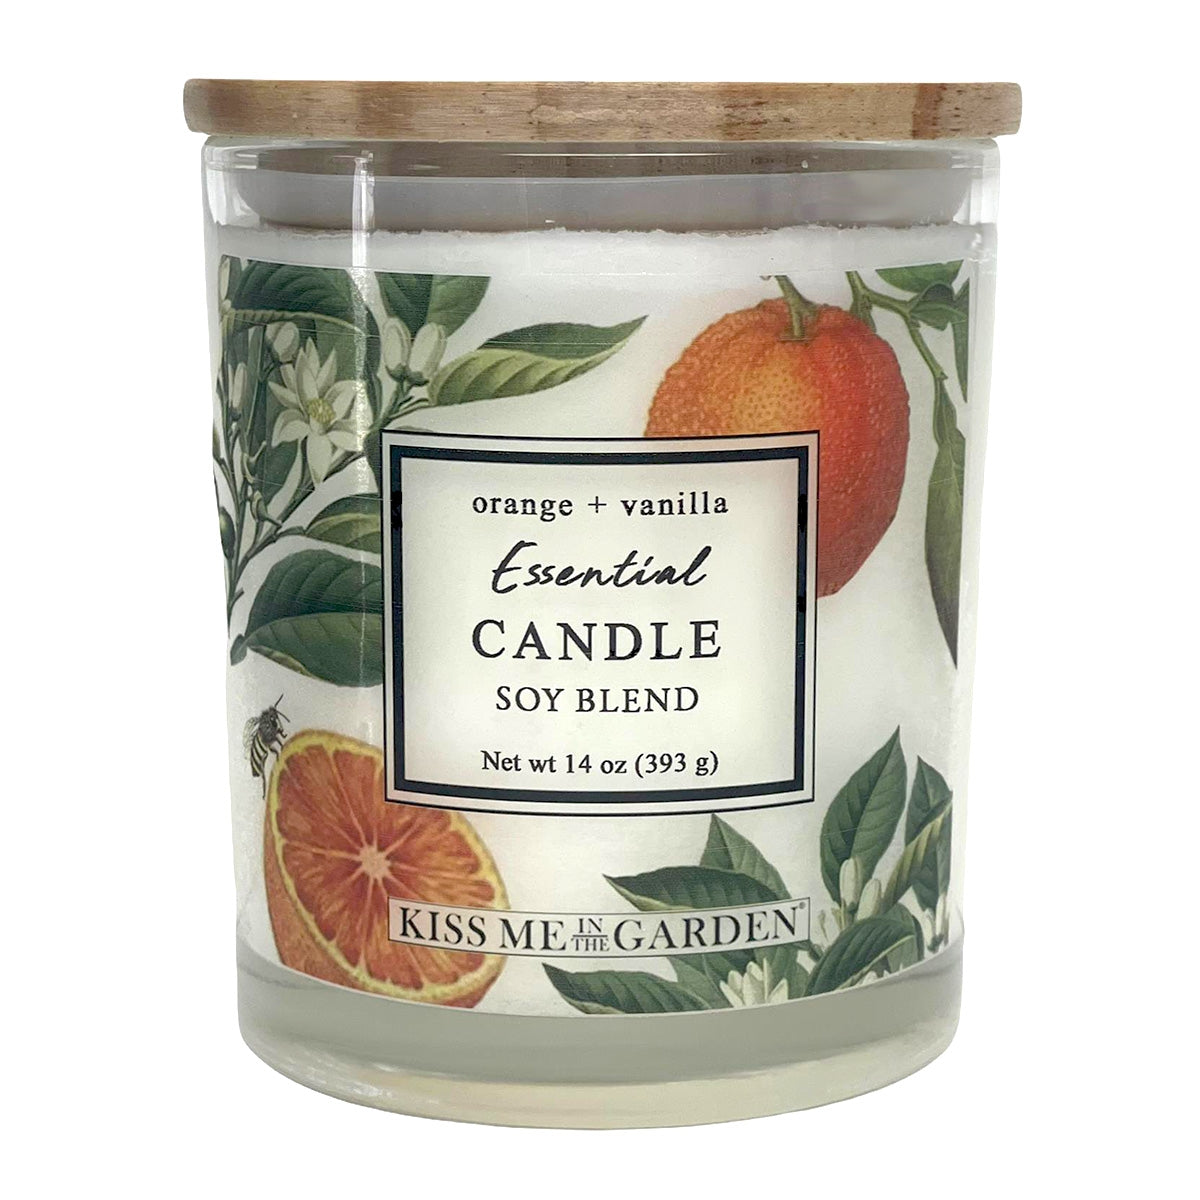 KISS ME IN THE GARDEN ORANGE VANILLA SOY CANDLE